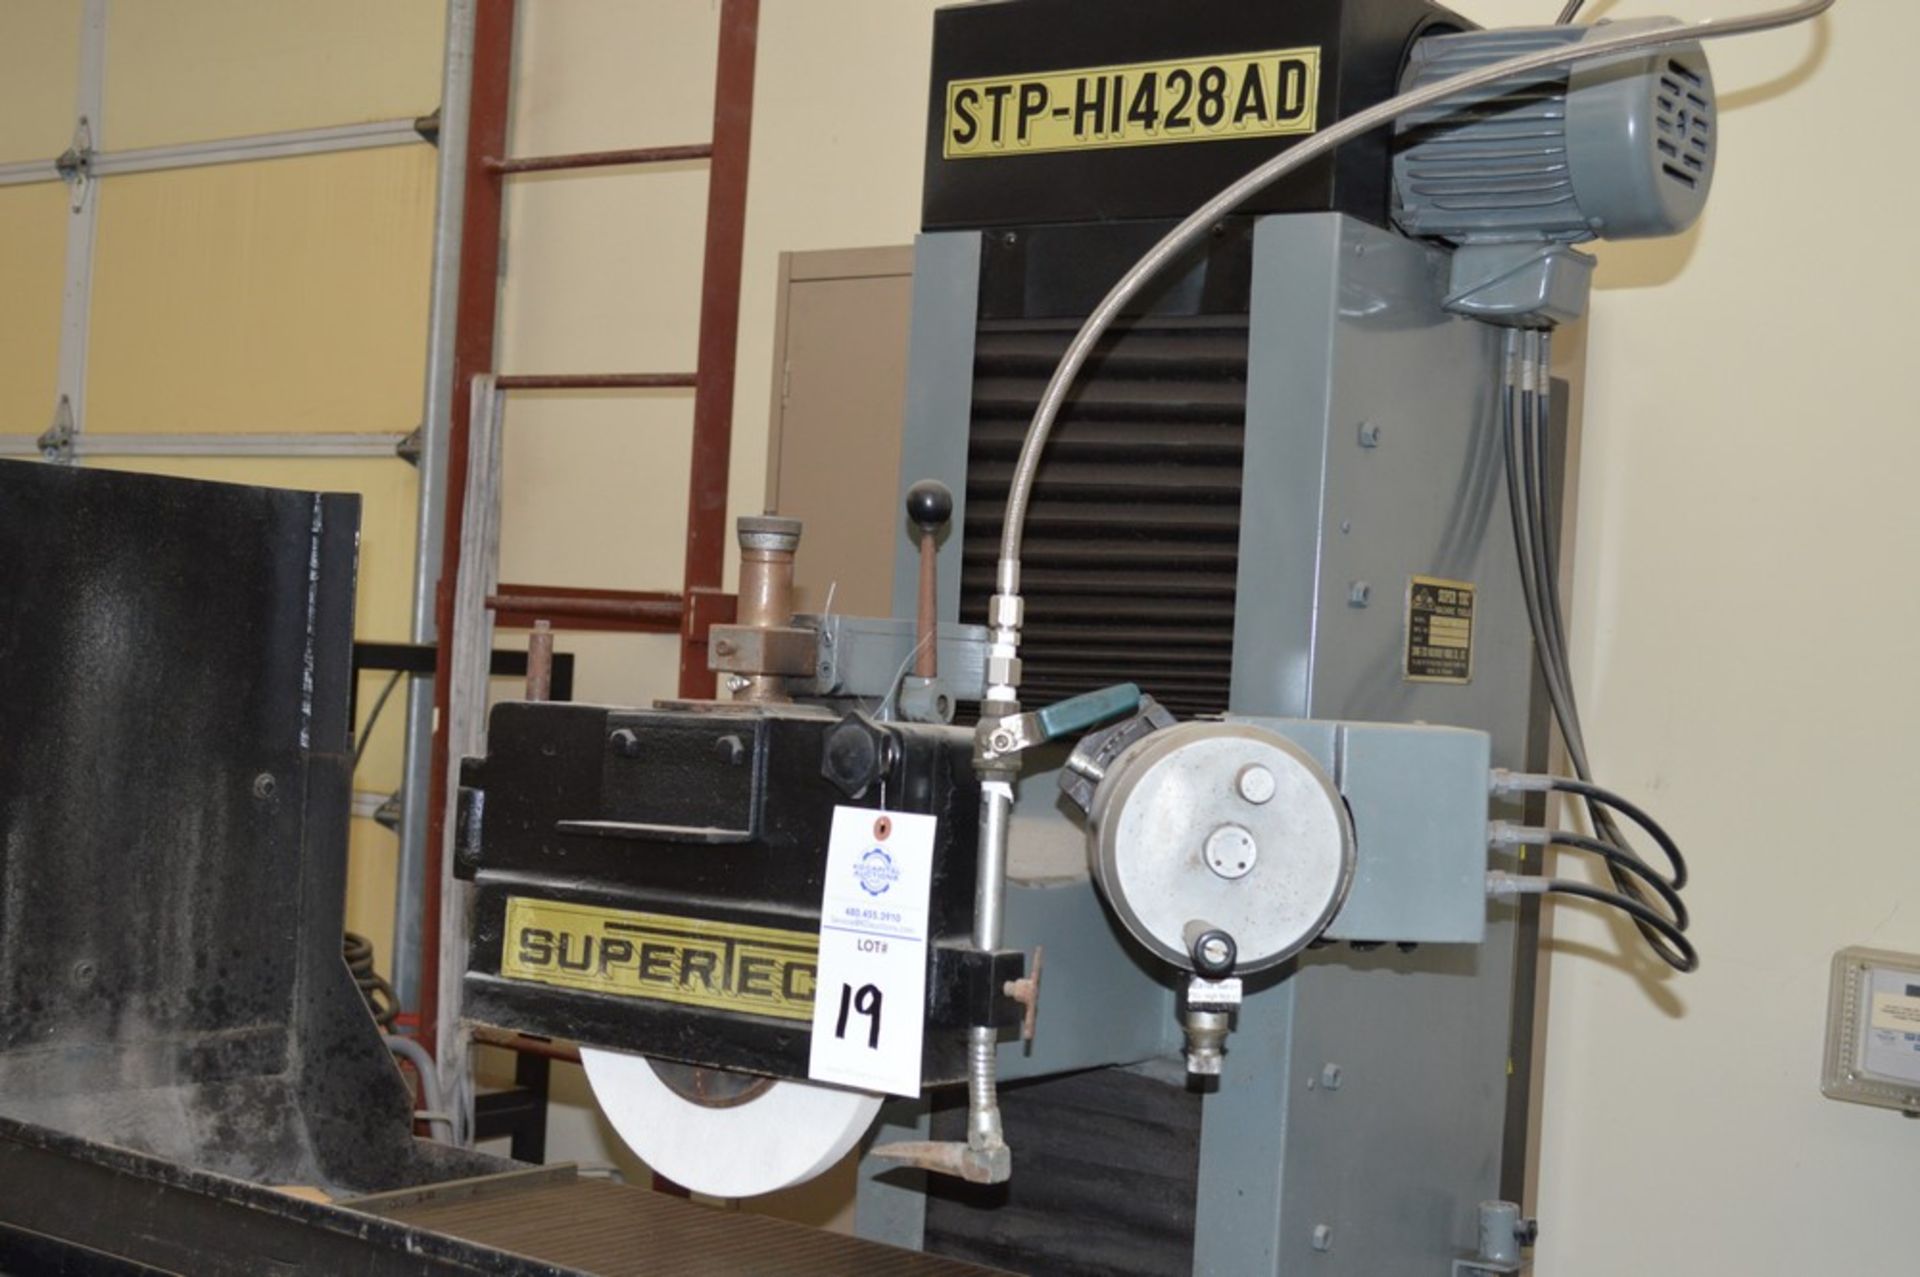 Supertec, STP-H1428 AD Grinder, Full three axis hydraulics, 12 x 27 magnetic chuck